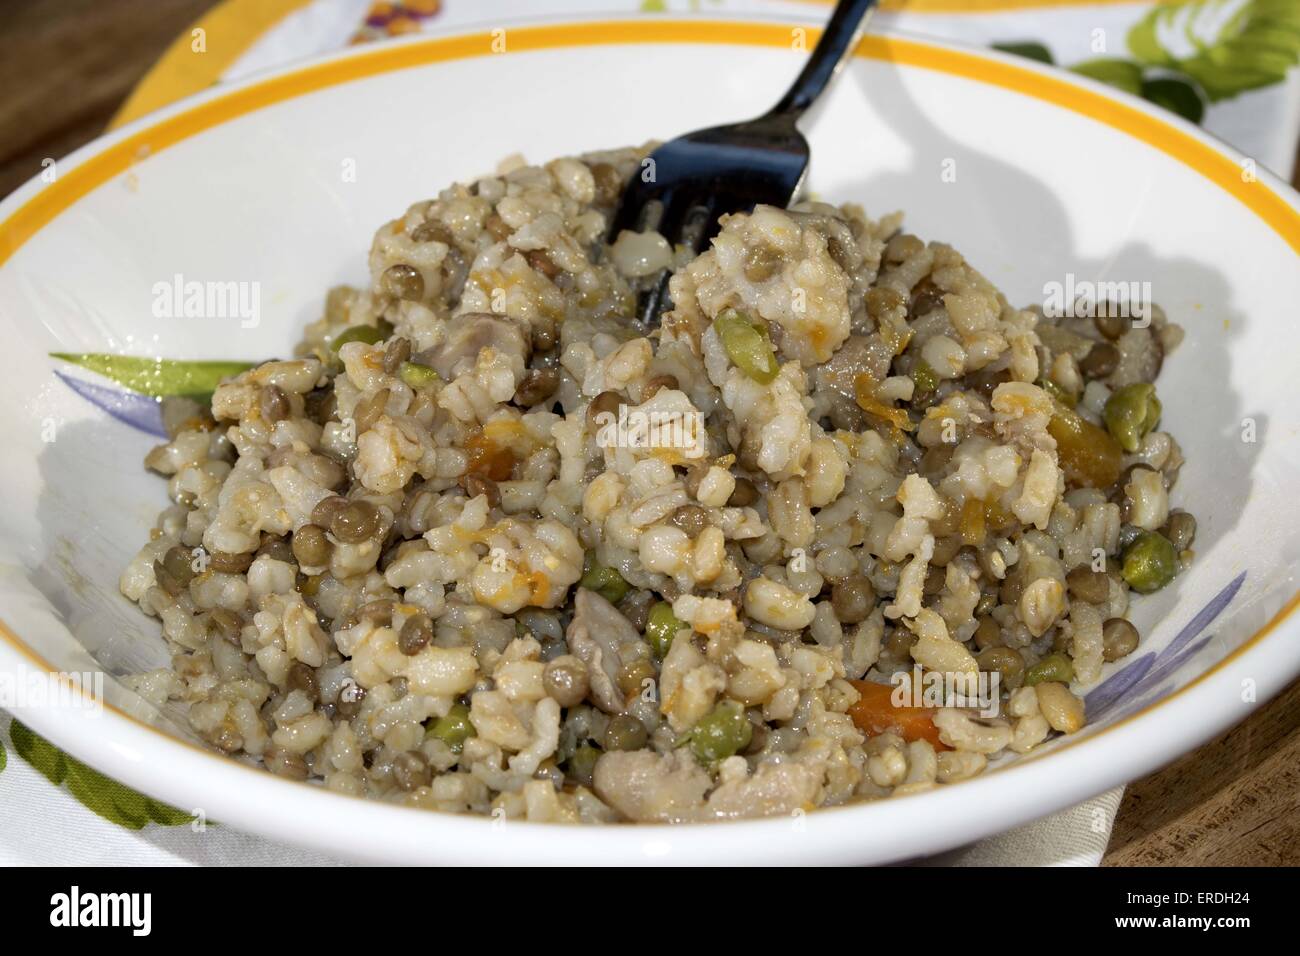 traditional vegetarian meal: soup of cereals Stock Photo